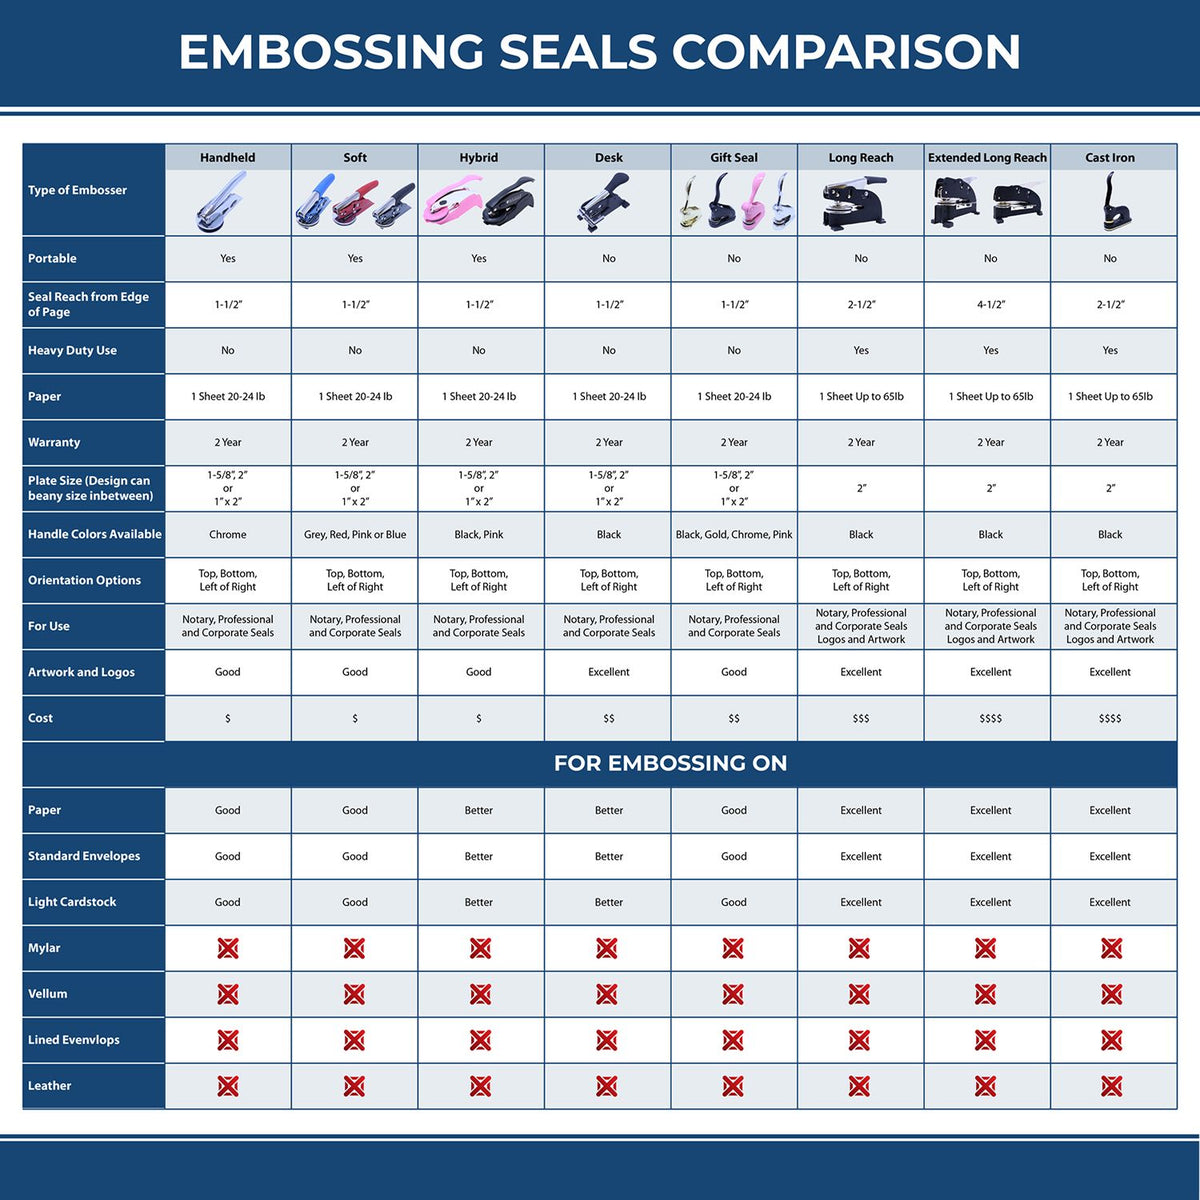 A comparison chart for the different types of mount models available for the State of Illinois Long Reach Architectural Embossing Seal.